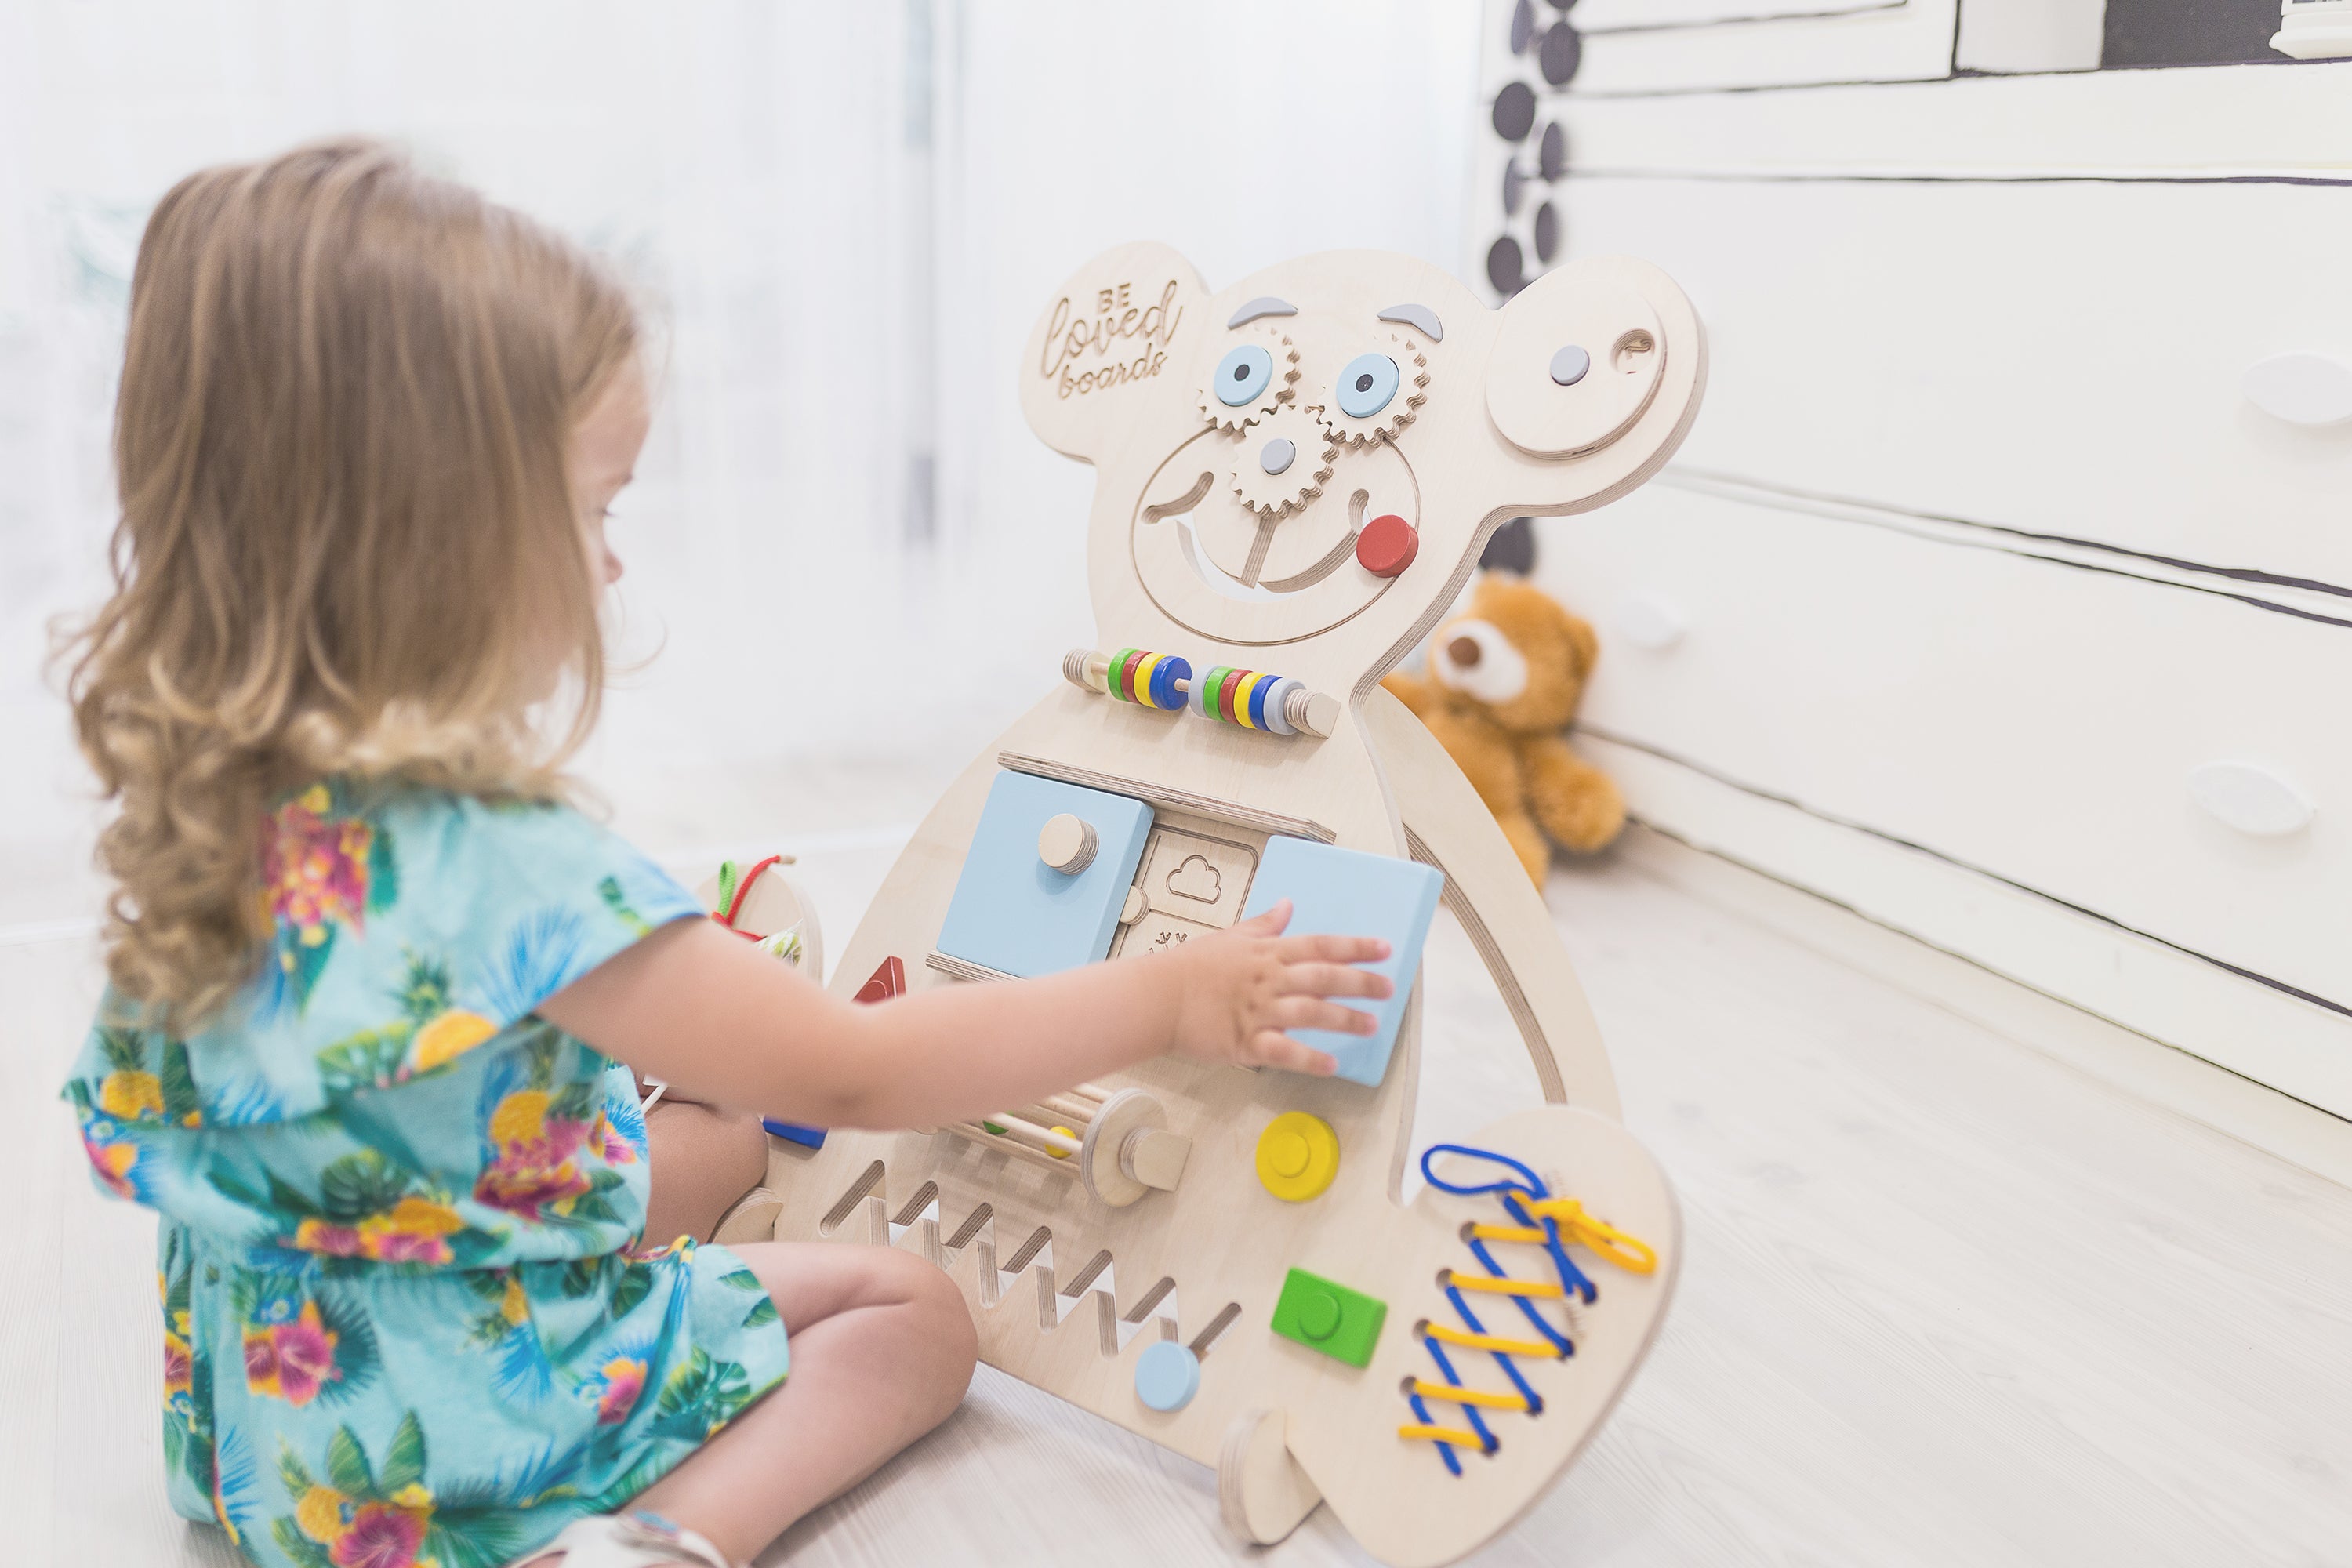 Wooden Busy Boards: The Perfect Toy for Curious Kids – Beloved boards